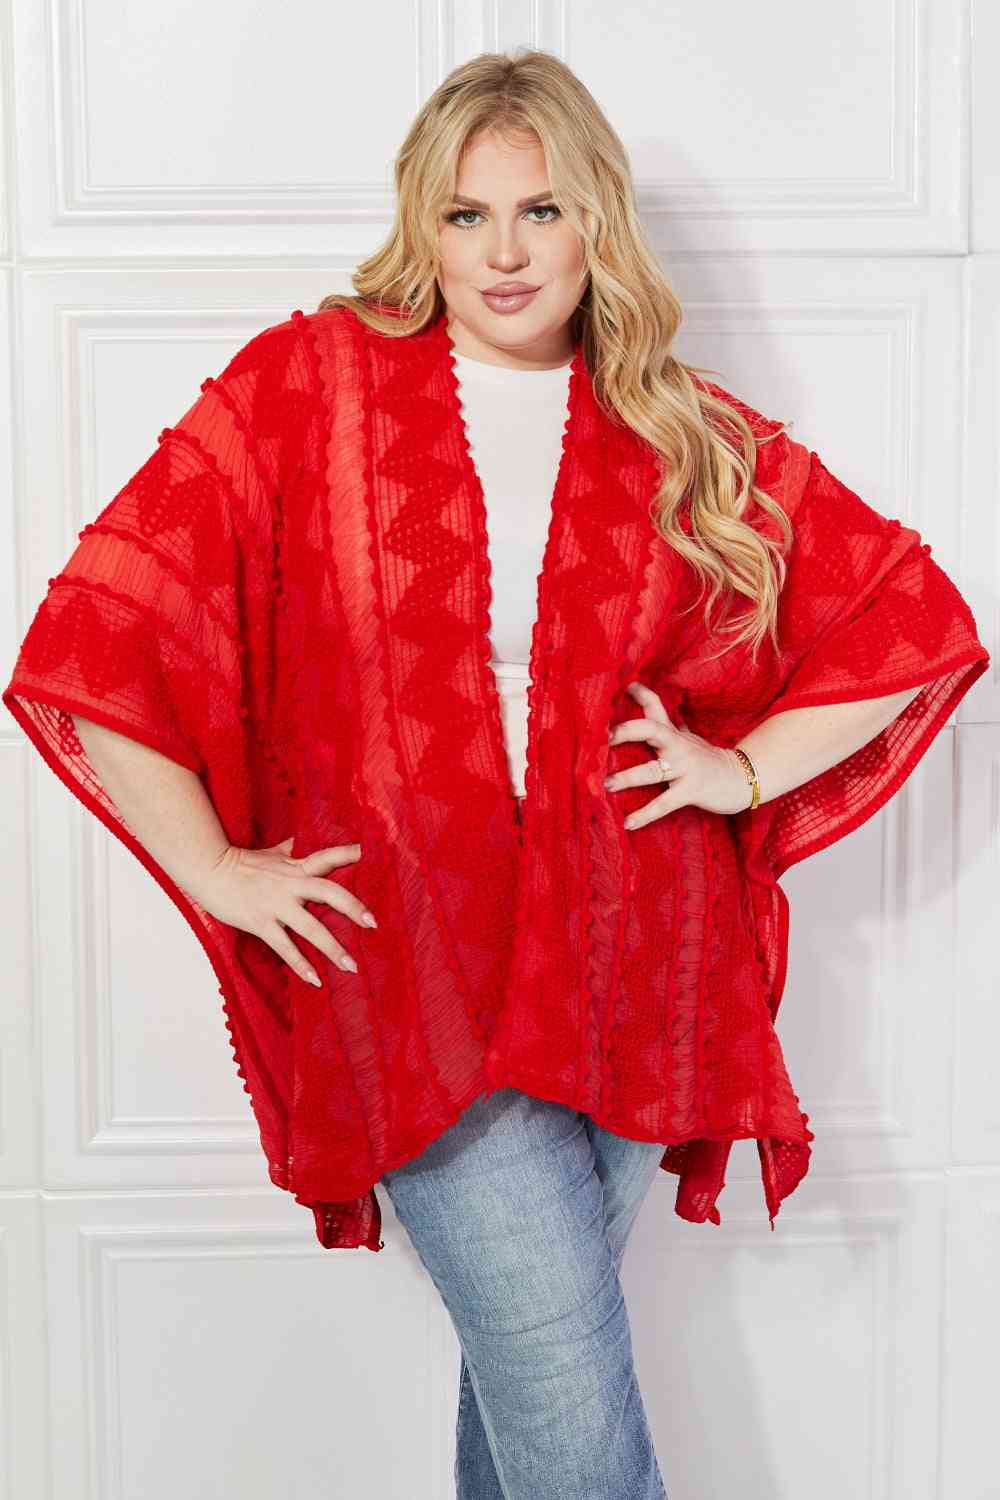 Pom-Pom Asymmetrical Poncho Cardigan in Red - Red / One Size - Women’s Clothing & Accessories - Outerwear - 3 - 2024